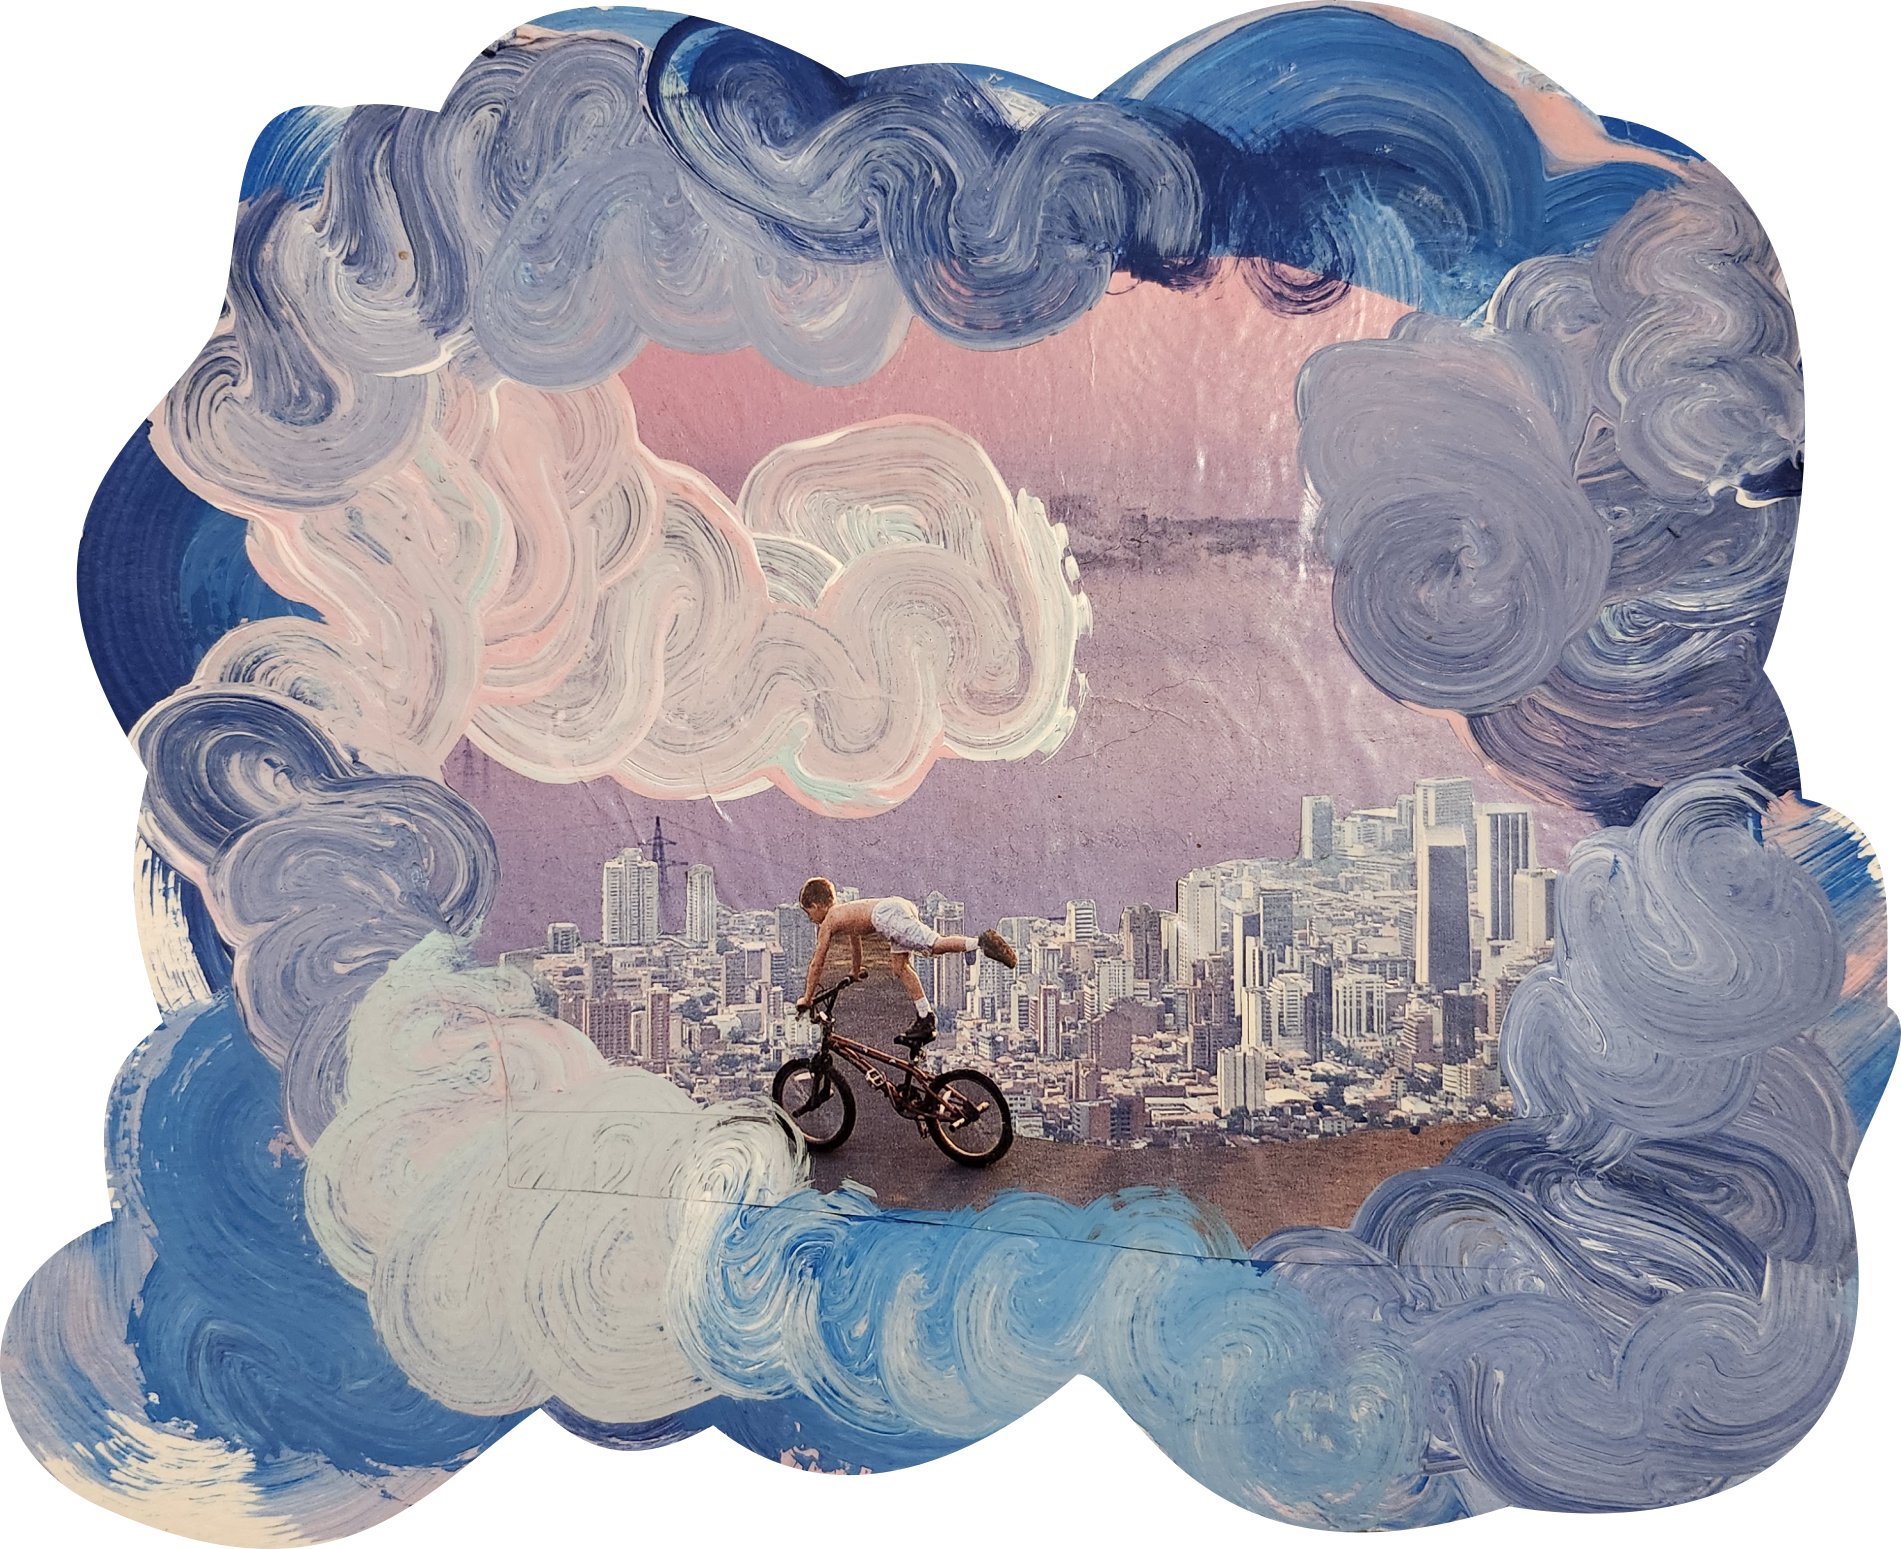 Mixed media collage with acrylic spirals and picture of a boy on a bmx bike